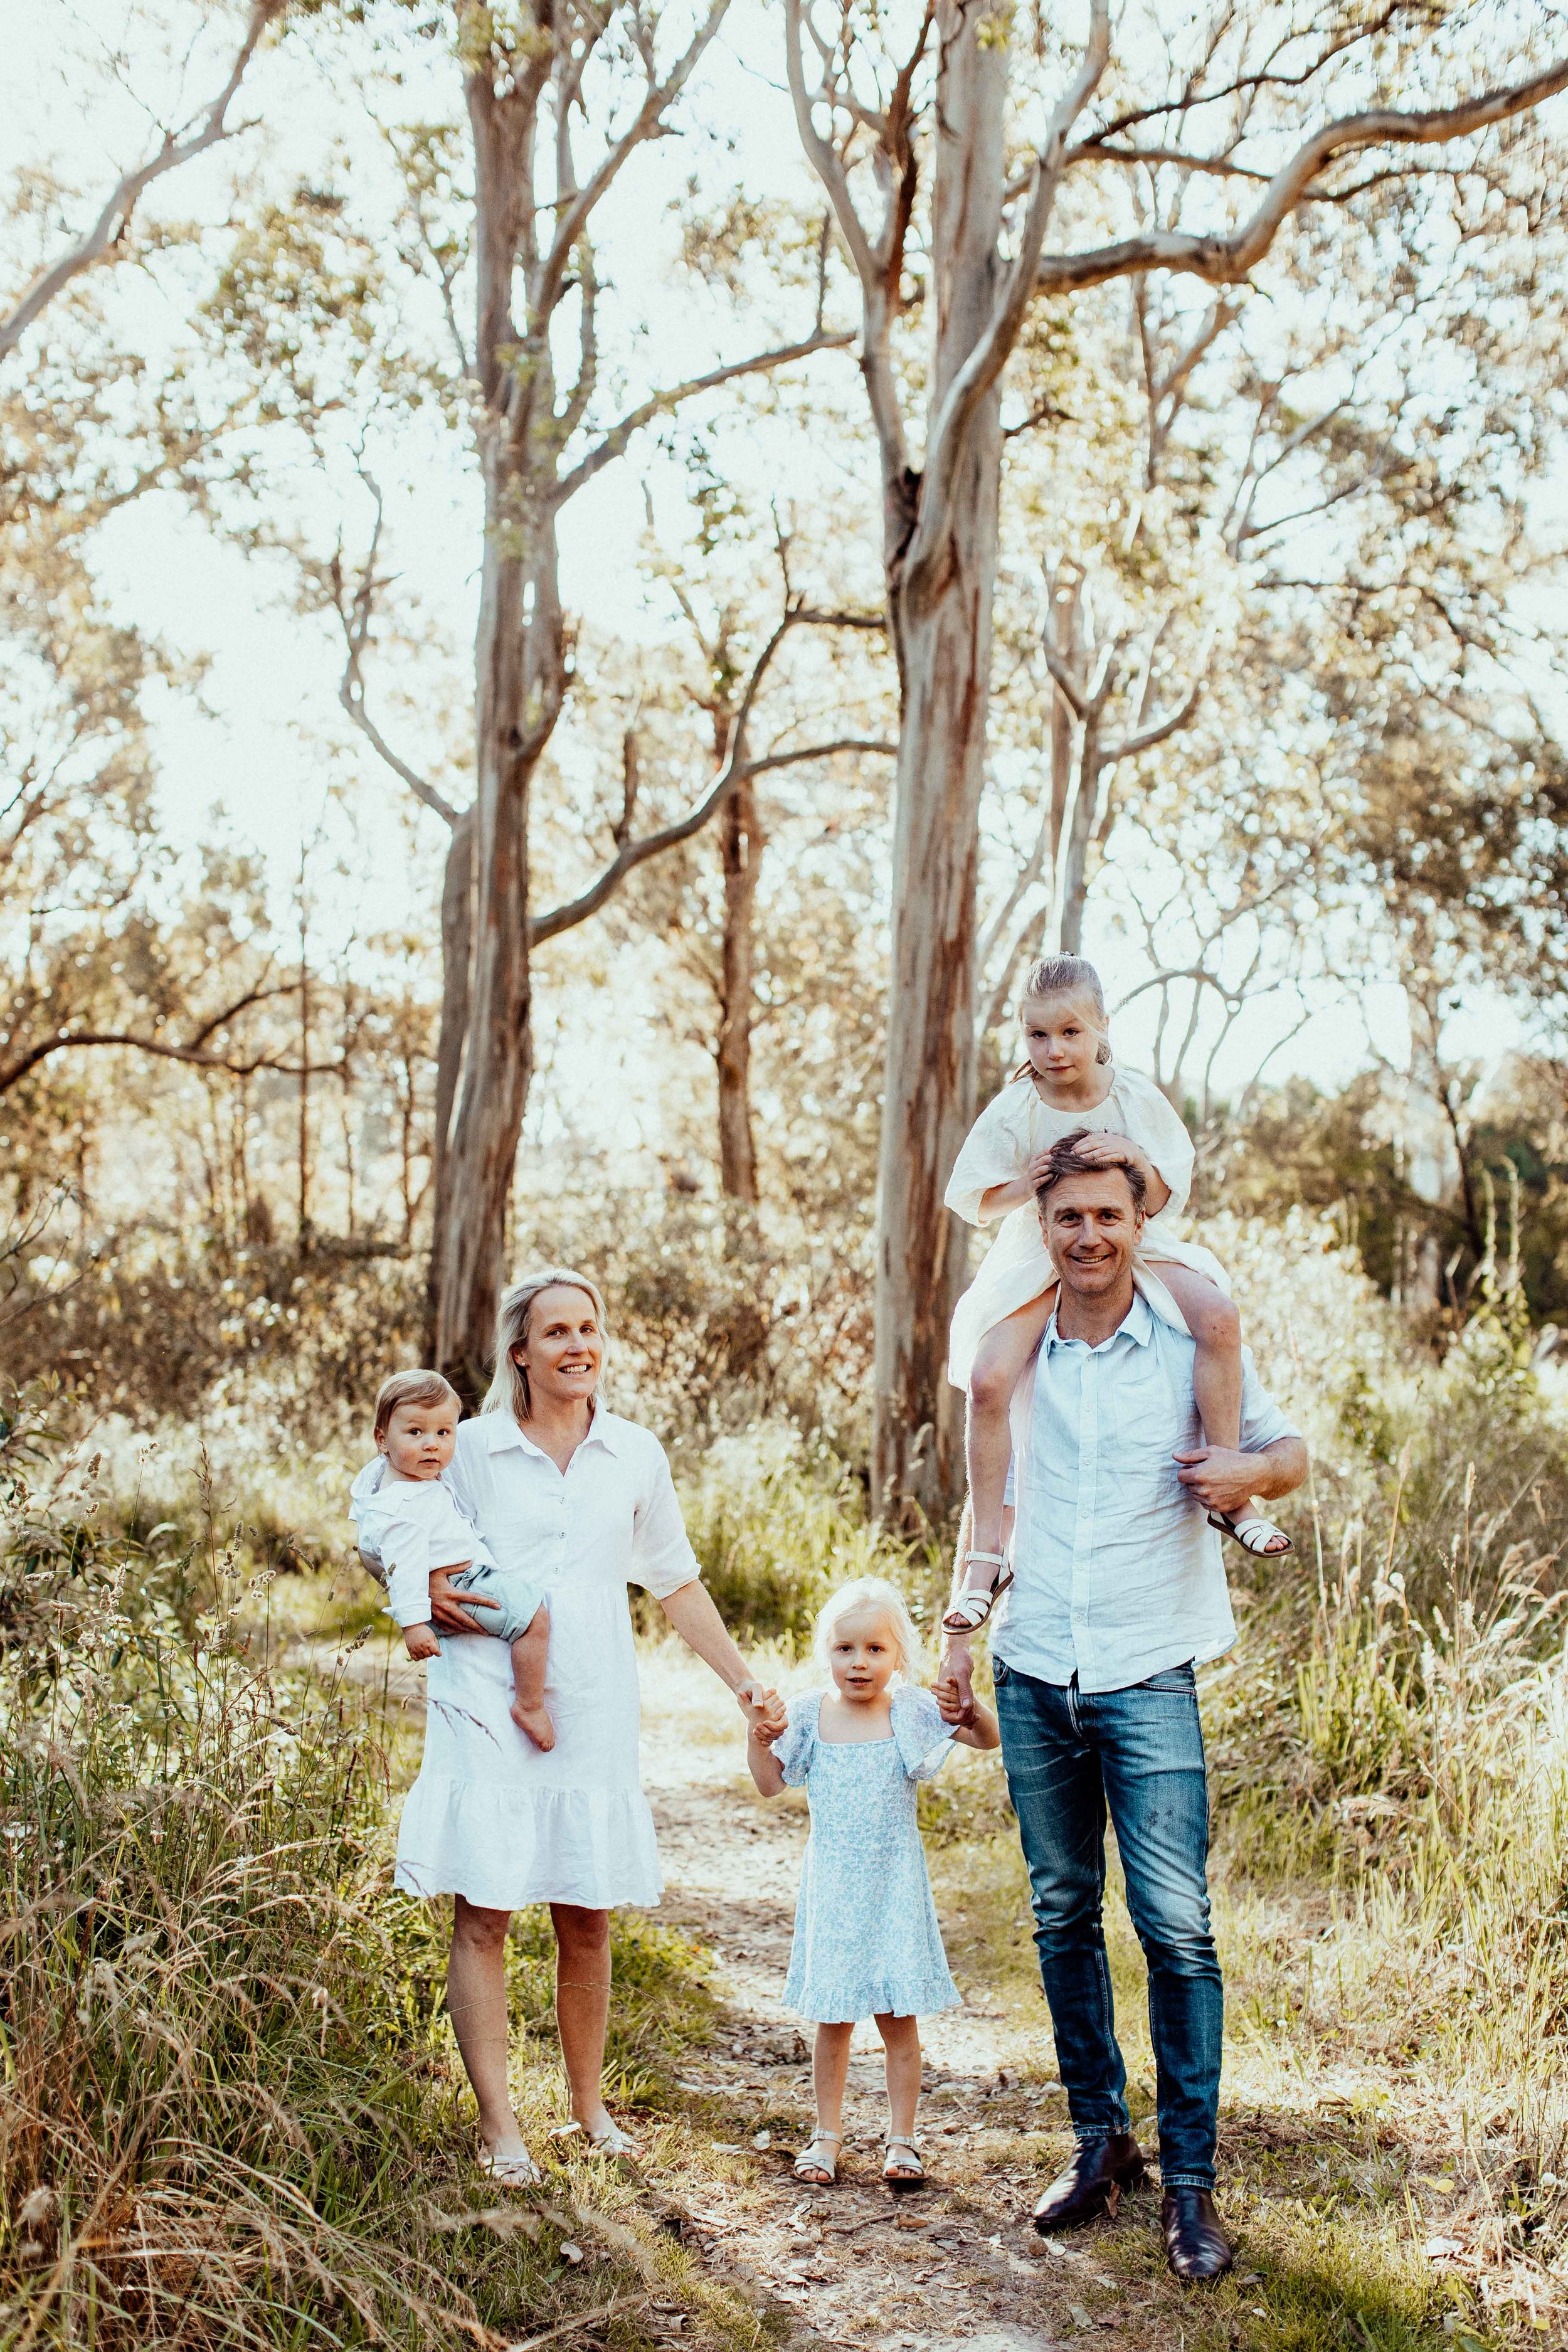 poole-family-bowral-southern-highlands-inhome-family-lifestyle-wollondilly-camden-macarthur-sydney-photography-www.emilyobrienphotography.net-34.jpg